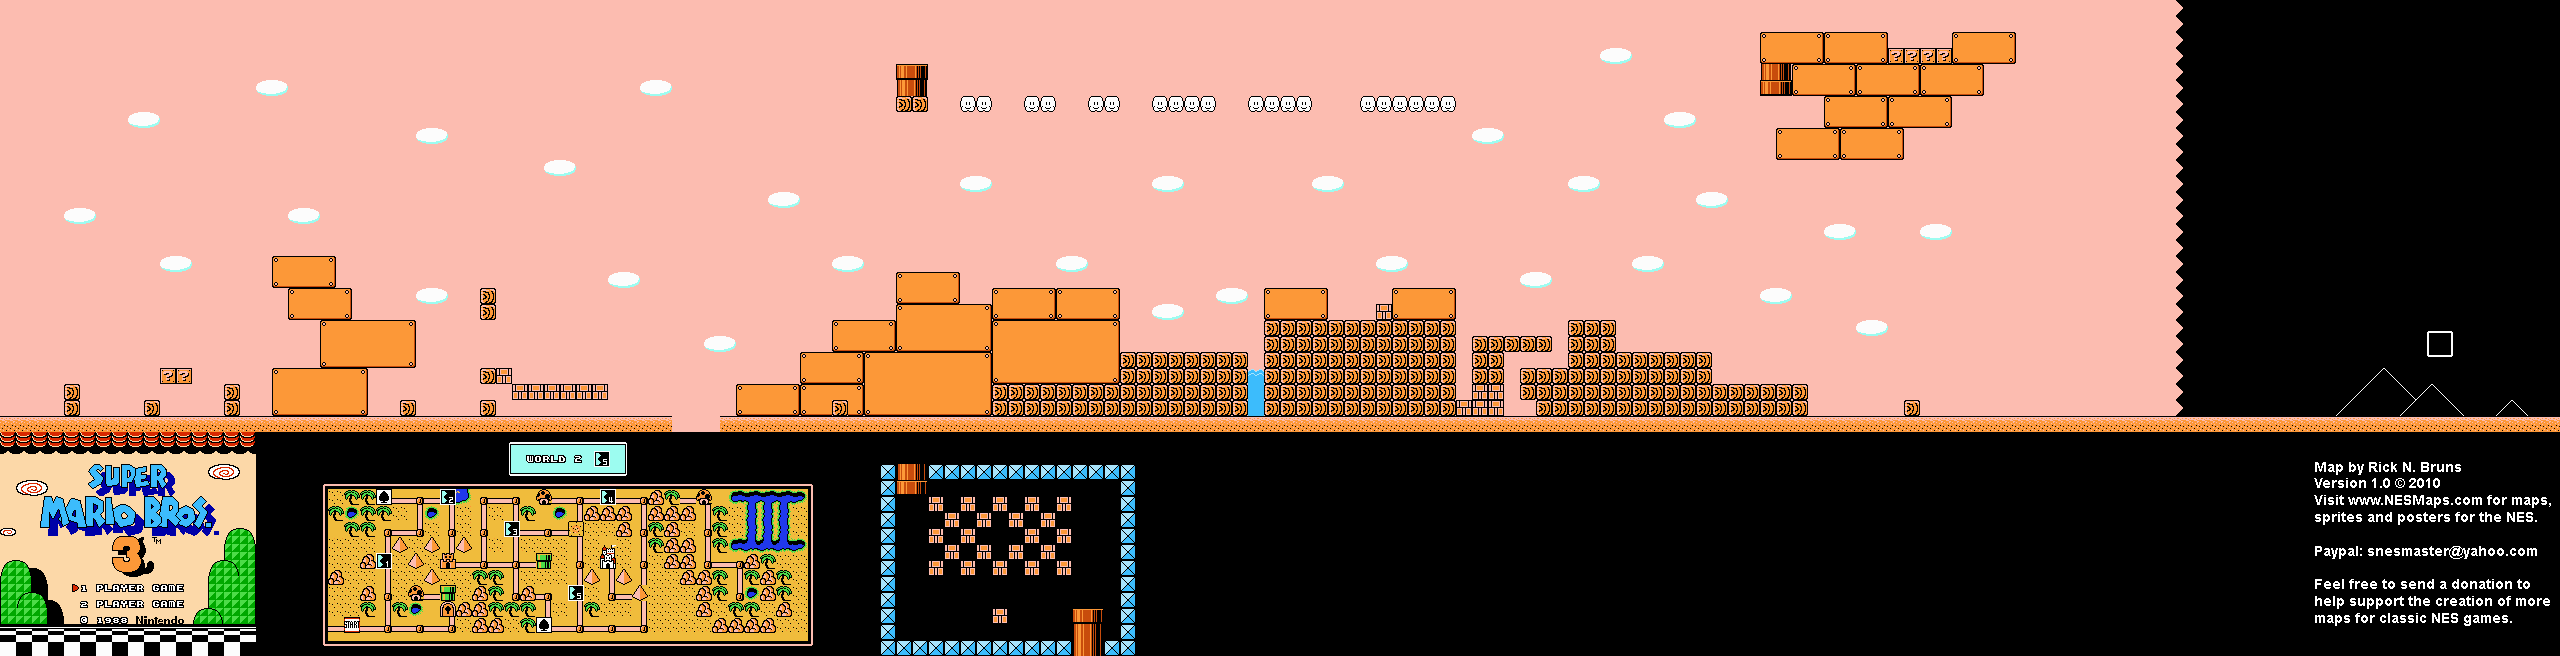 how many worlds are on super mario bros 3